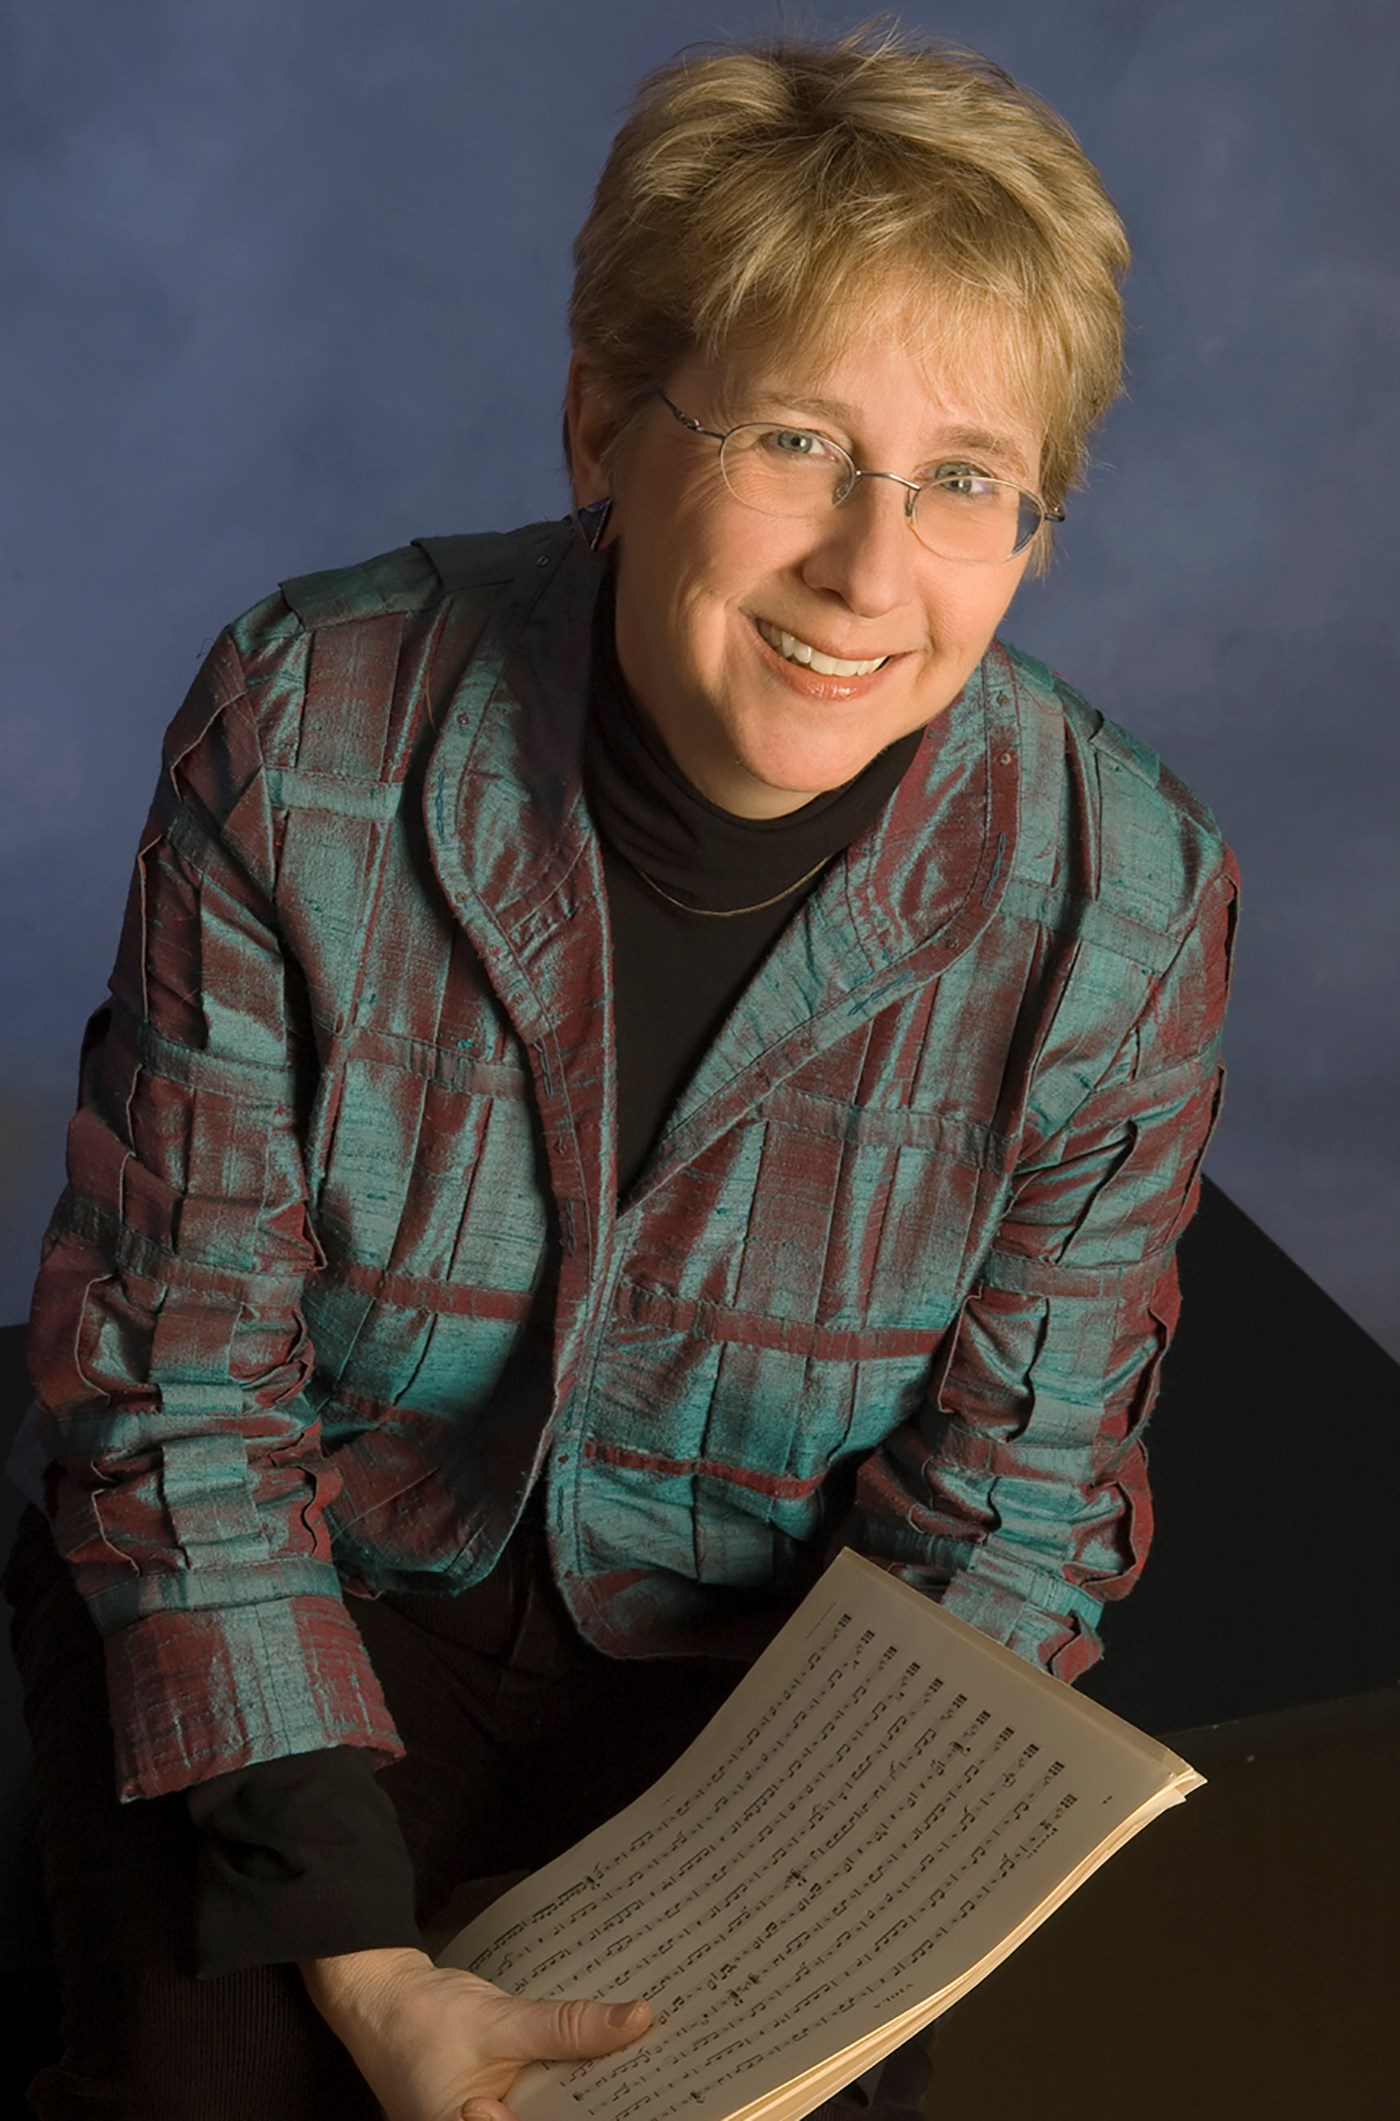 Ellen Michaud Martins is an Adjunct Faculty in the Music Department at UMass Lowell.